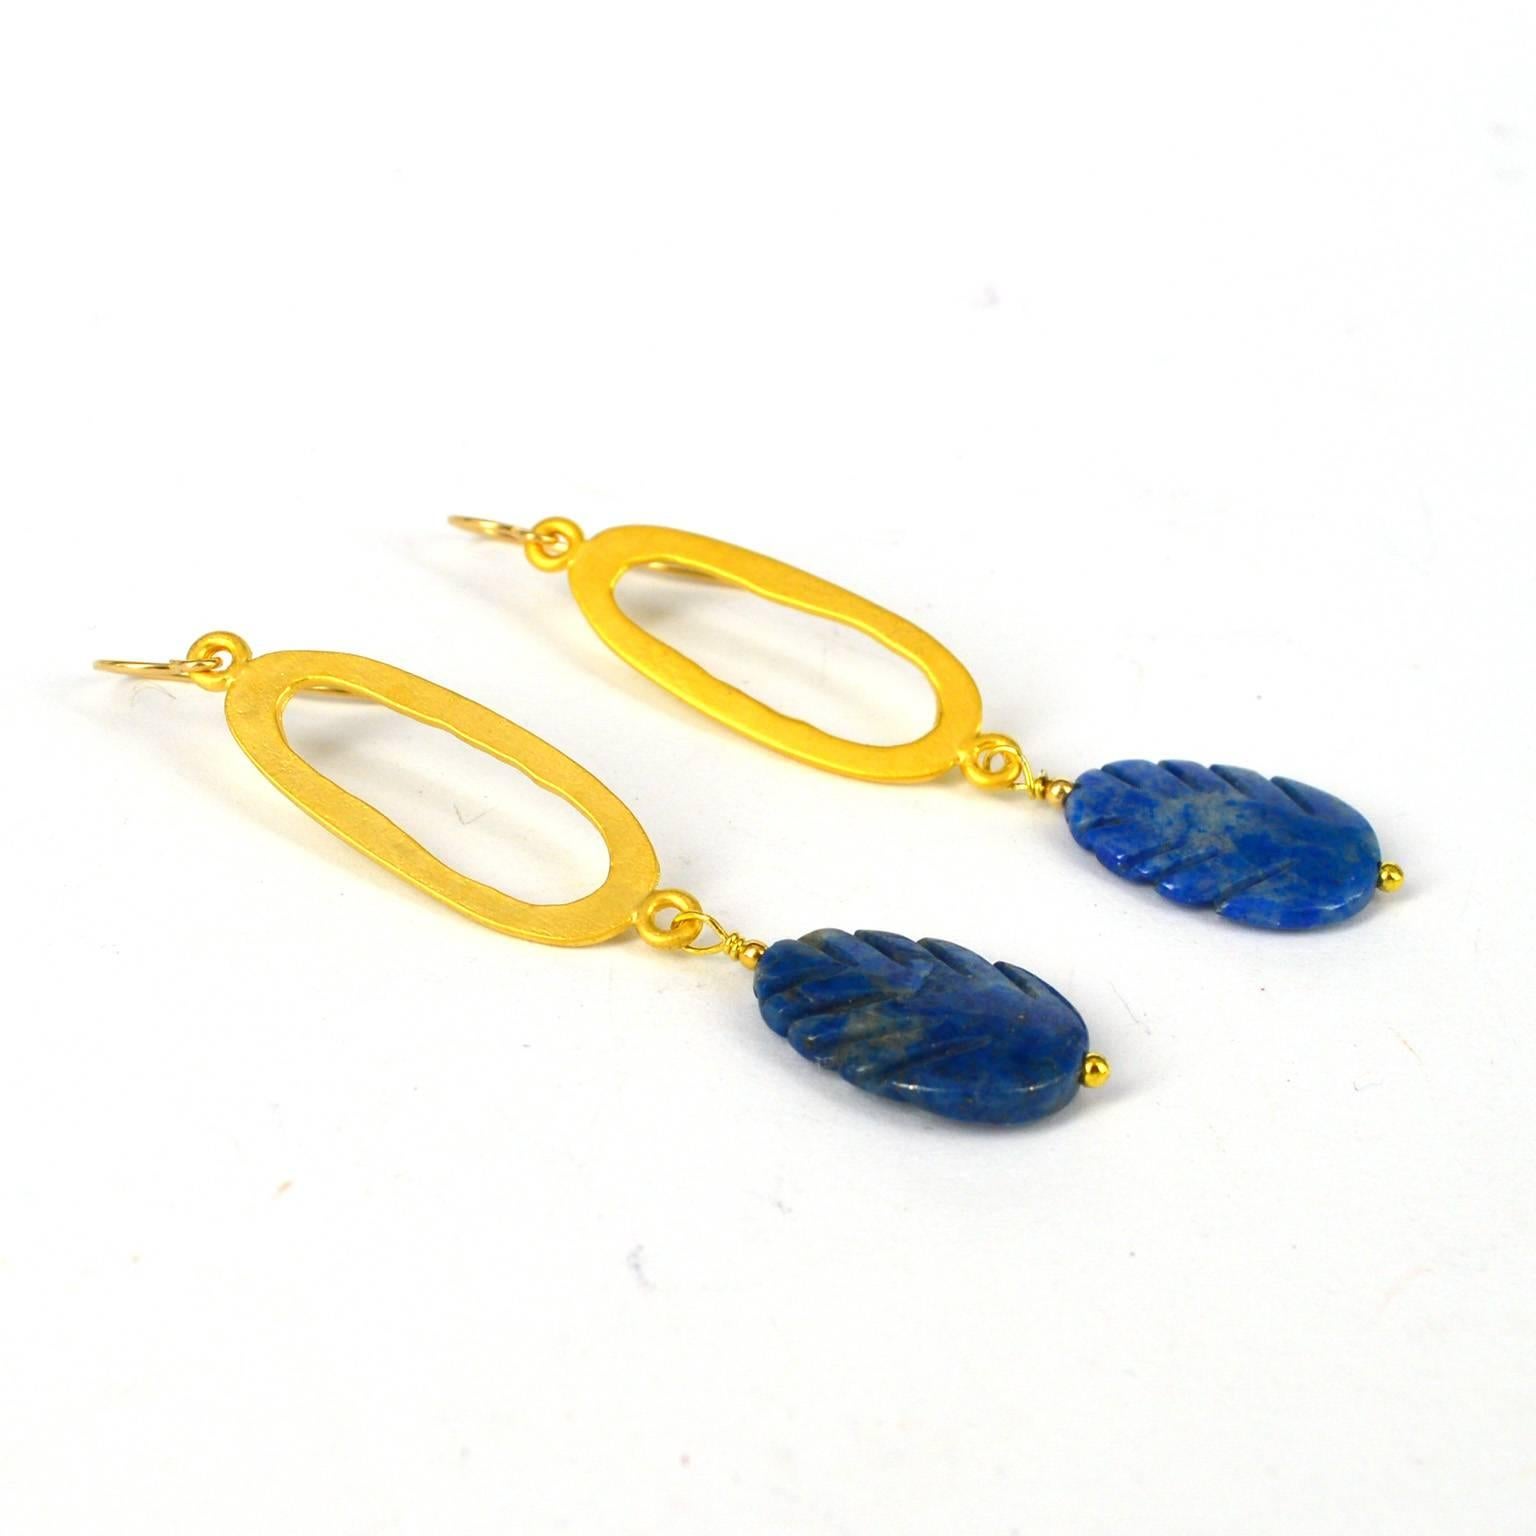 Carved natural Lapis Lazuli leaf beads with a gold plated oval connector and 14k gold filled sheppard hook.
Earring hangs 70mm.